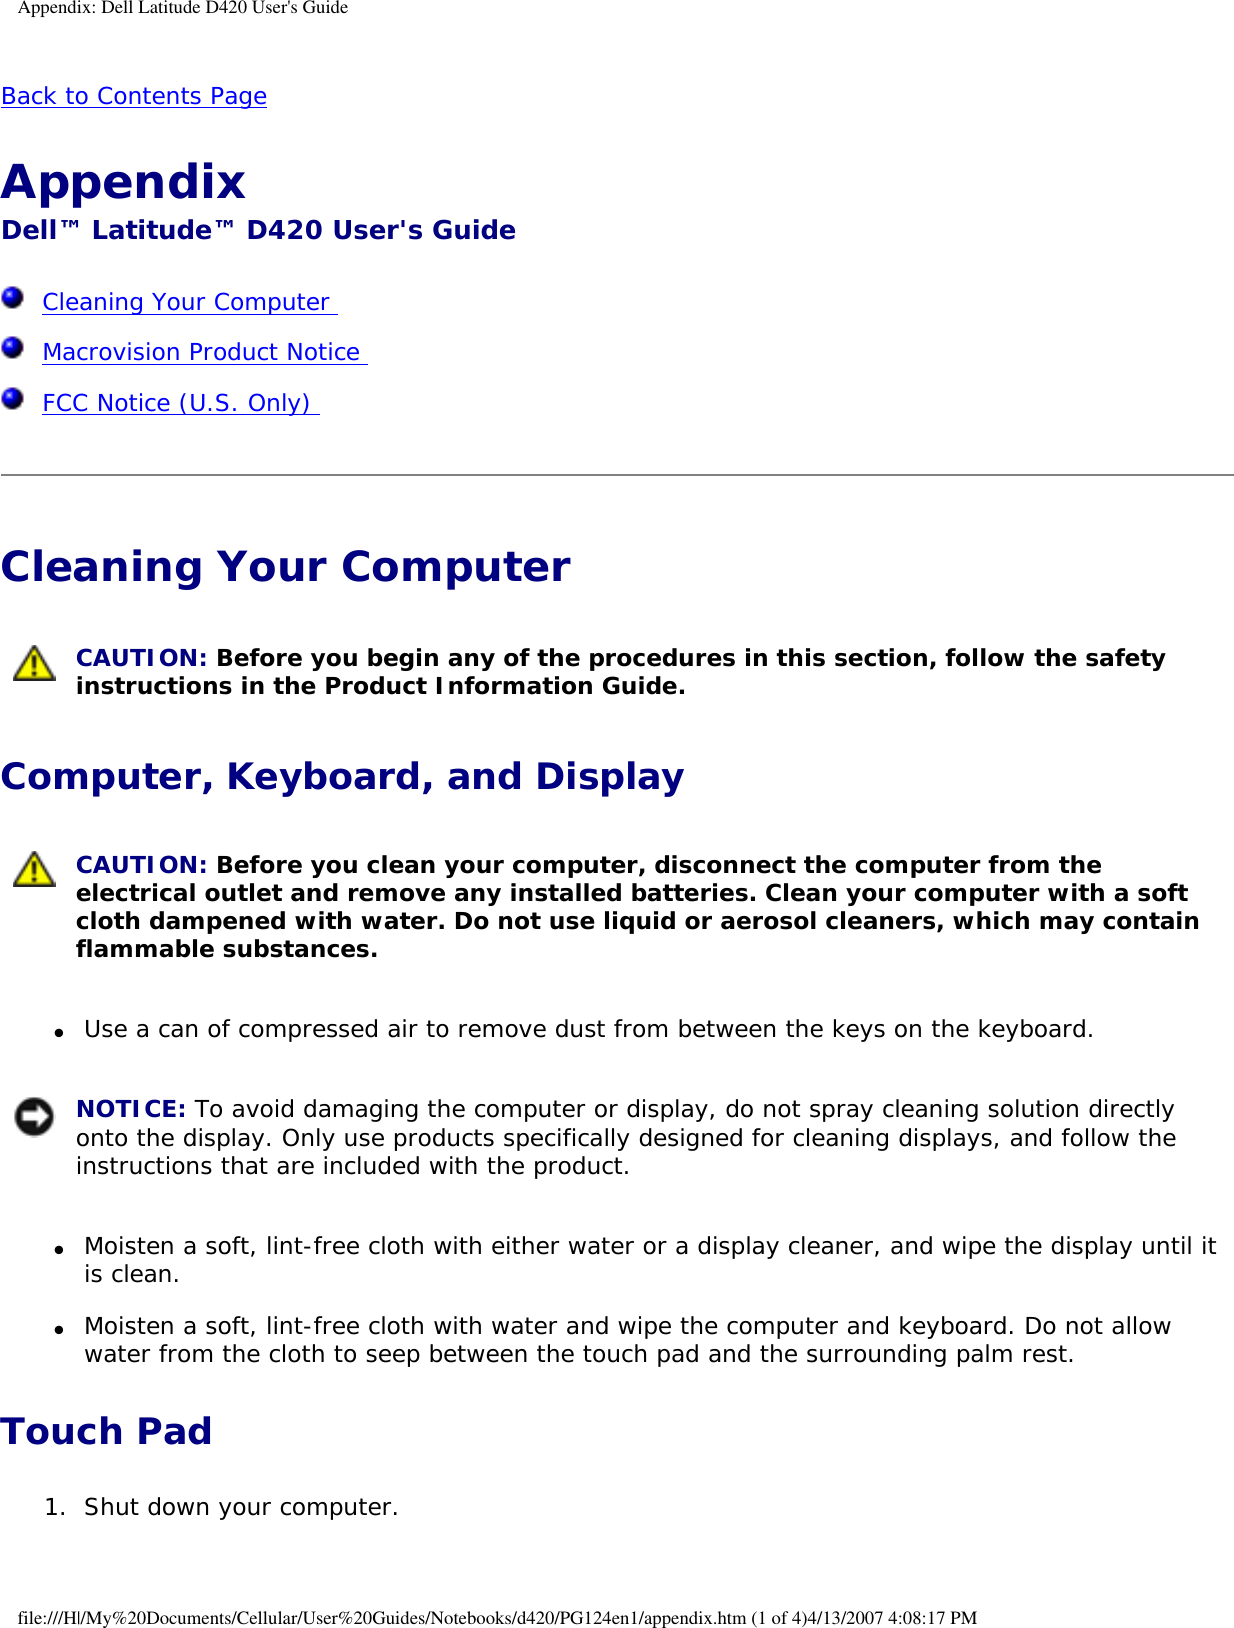 Appendix: Dell Latitude D420 User&apos;s GuideBack to Contents Page Appendix Dell™ Latitude™ D420 User&apos;s Guide  Cleaning Your Computer   Macrovision Product Notice   FCC Notice (U.S. Only)  Cleaning Your Computer  CAUTION: Before you begin any of the procedures in this section, follow the safety instructions in the Product Information Guide. Computer, Keyboard, and Display CAUTION: Before you clean your computer, disconnect the computer from the electrical outlet and remove any installed batteries. Clean your computer with a soft cloth dampened with water. Do not use liquid or aerosol cleaners, which may contain flammable substances. ●     Use a can of compressed air to remove dust from between the keys on the keyboard.   NOTICE: To avoid damaging the computer or display, do not spray cleaning solution directly onto the display. Only use products specifically designed for cleaning displays, and follow the instructions that are included with the product. ●     Moisten a soft, lint-free cloth with either water or a display cleaner, and wipe the display until it is clean.  ●     Moisten a soft, lint-free cloth with water and wipe the computer and keyboard. Do not allow water from the cloth to seep between the touch pad and the surrounding palm rest.  Touch Pad1.  Shut down your computer.   file:///H|/My%20Documents/Cellular/User%20Guides/Notebooks/d420/PG124en1/appendix.htm (1 of 4)4/13/2007 4:08:17 PM